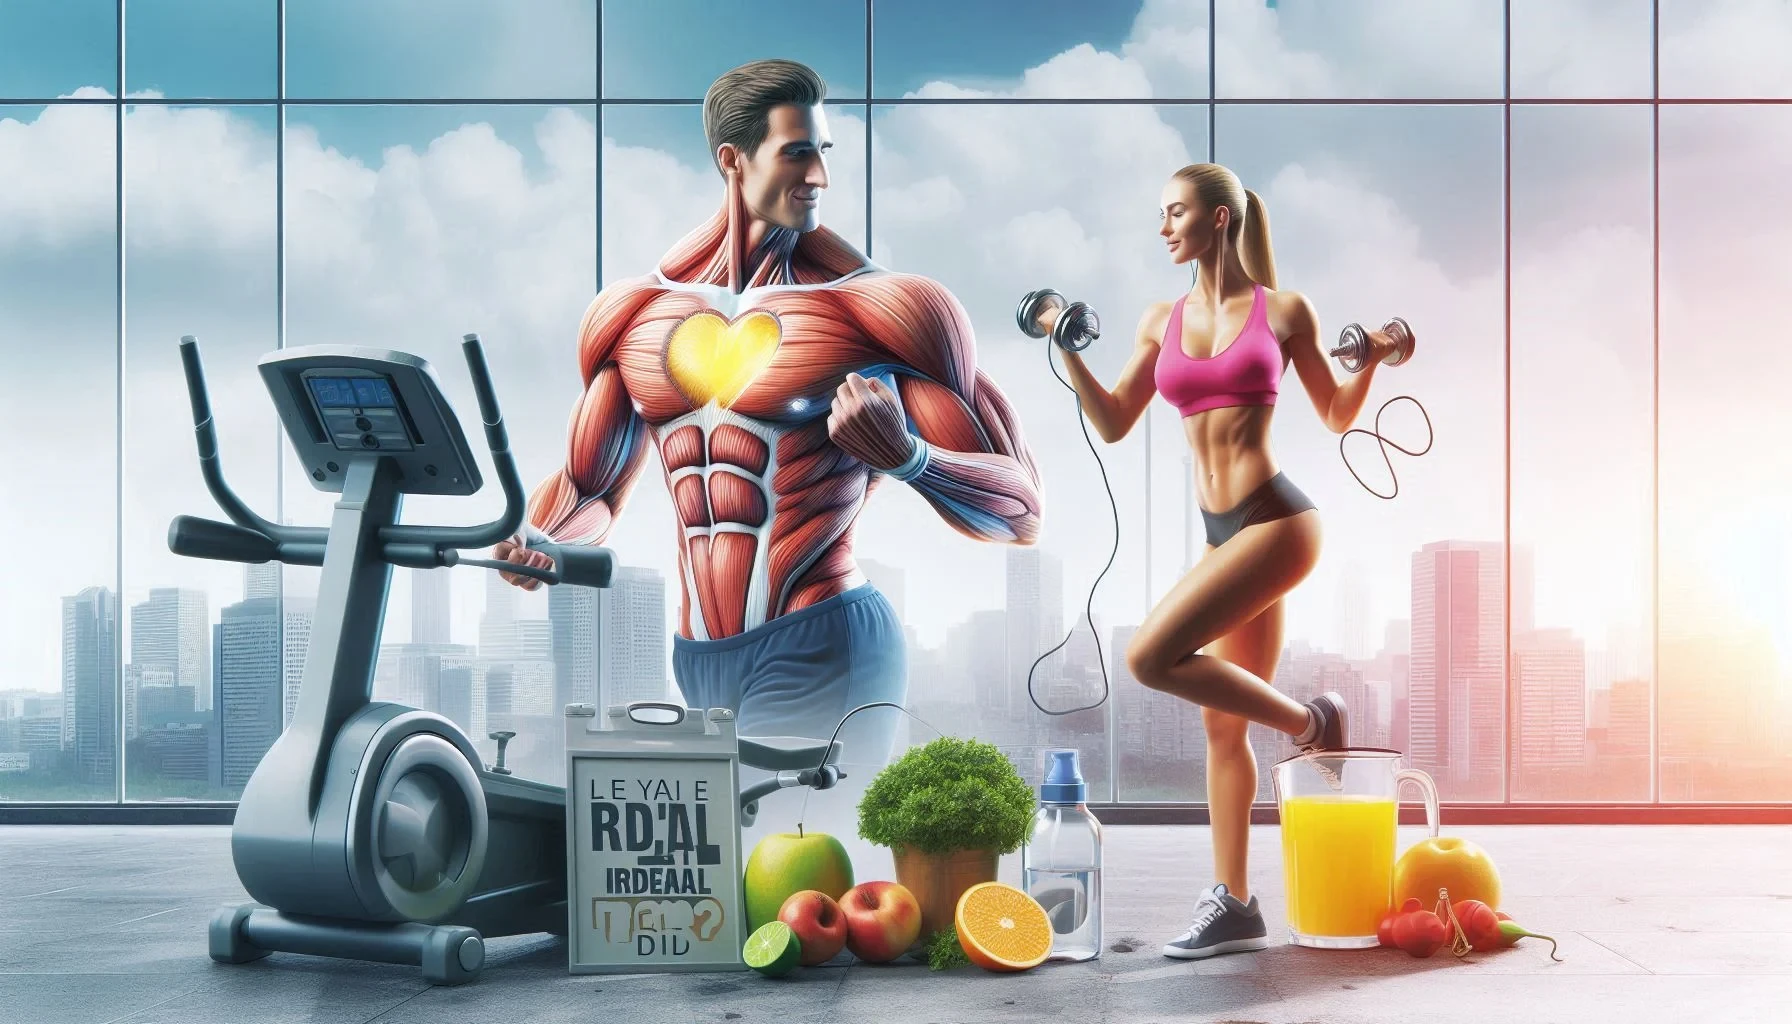 Can You Have an Ideal Body with Real Fitness Equipment?